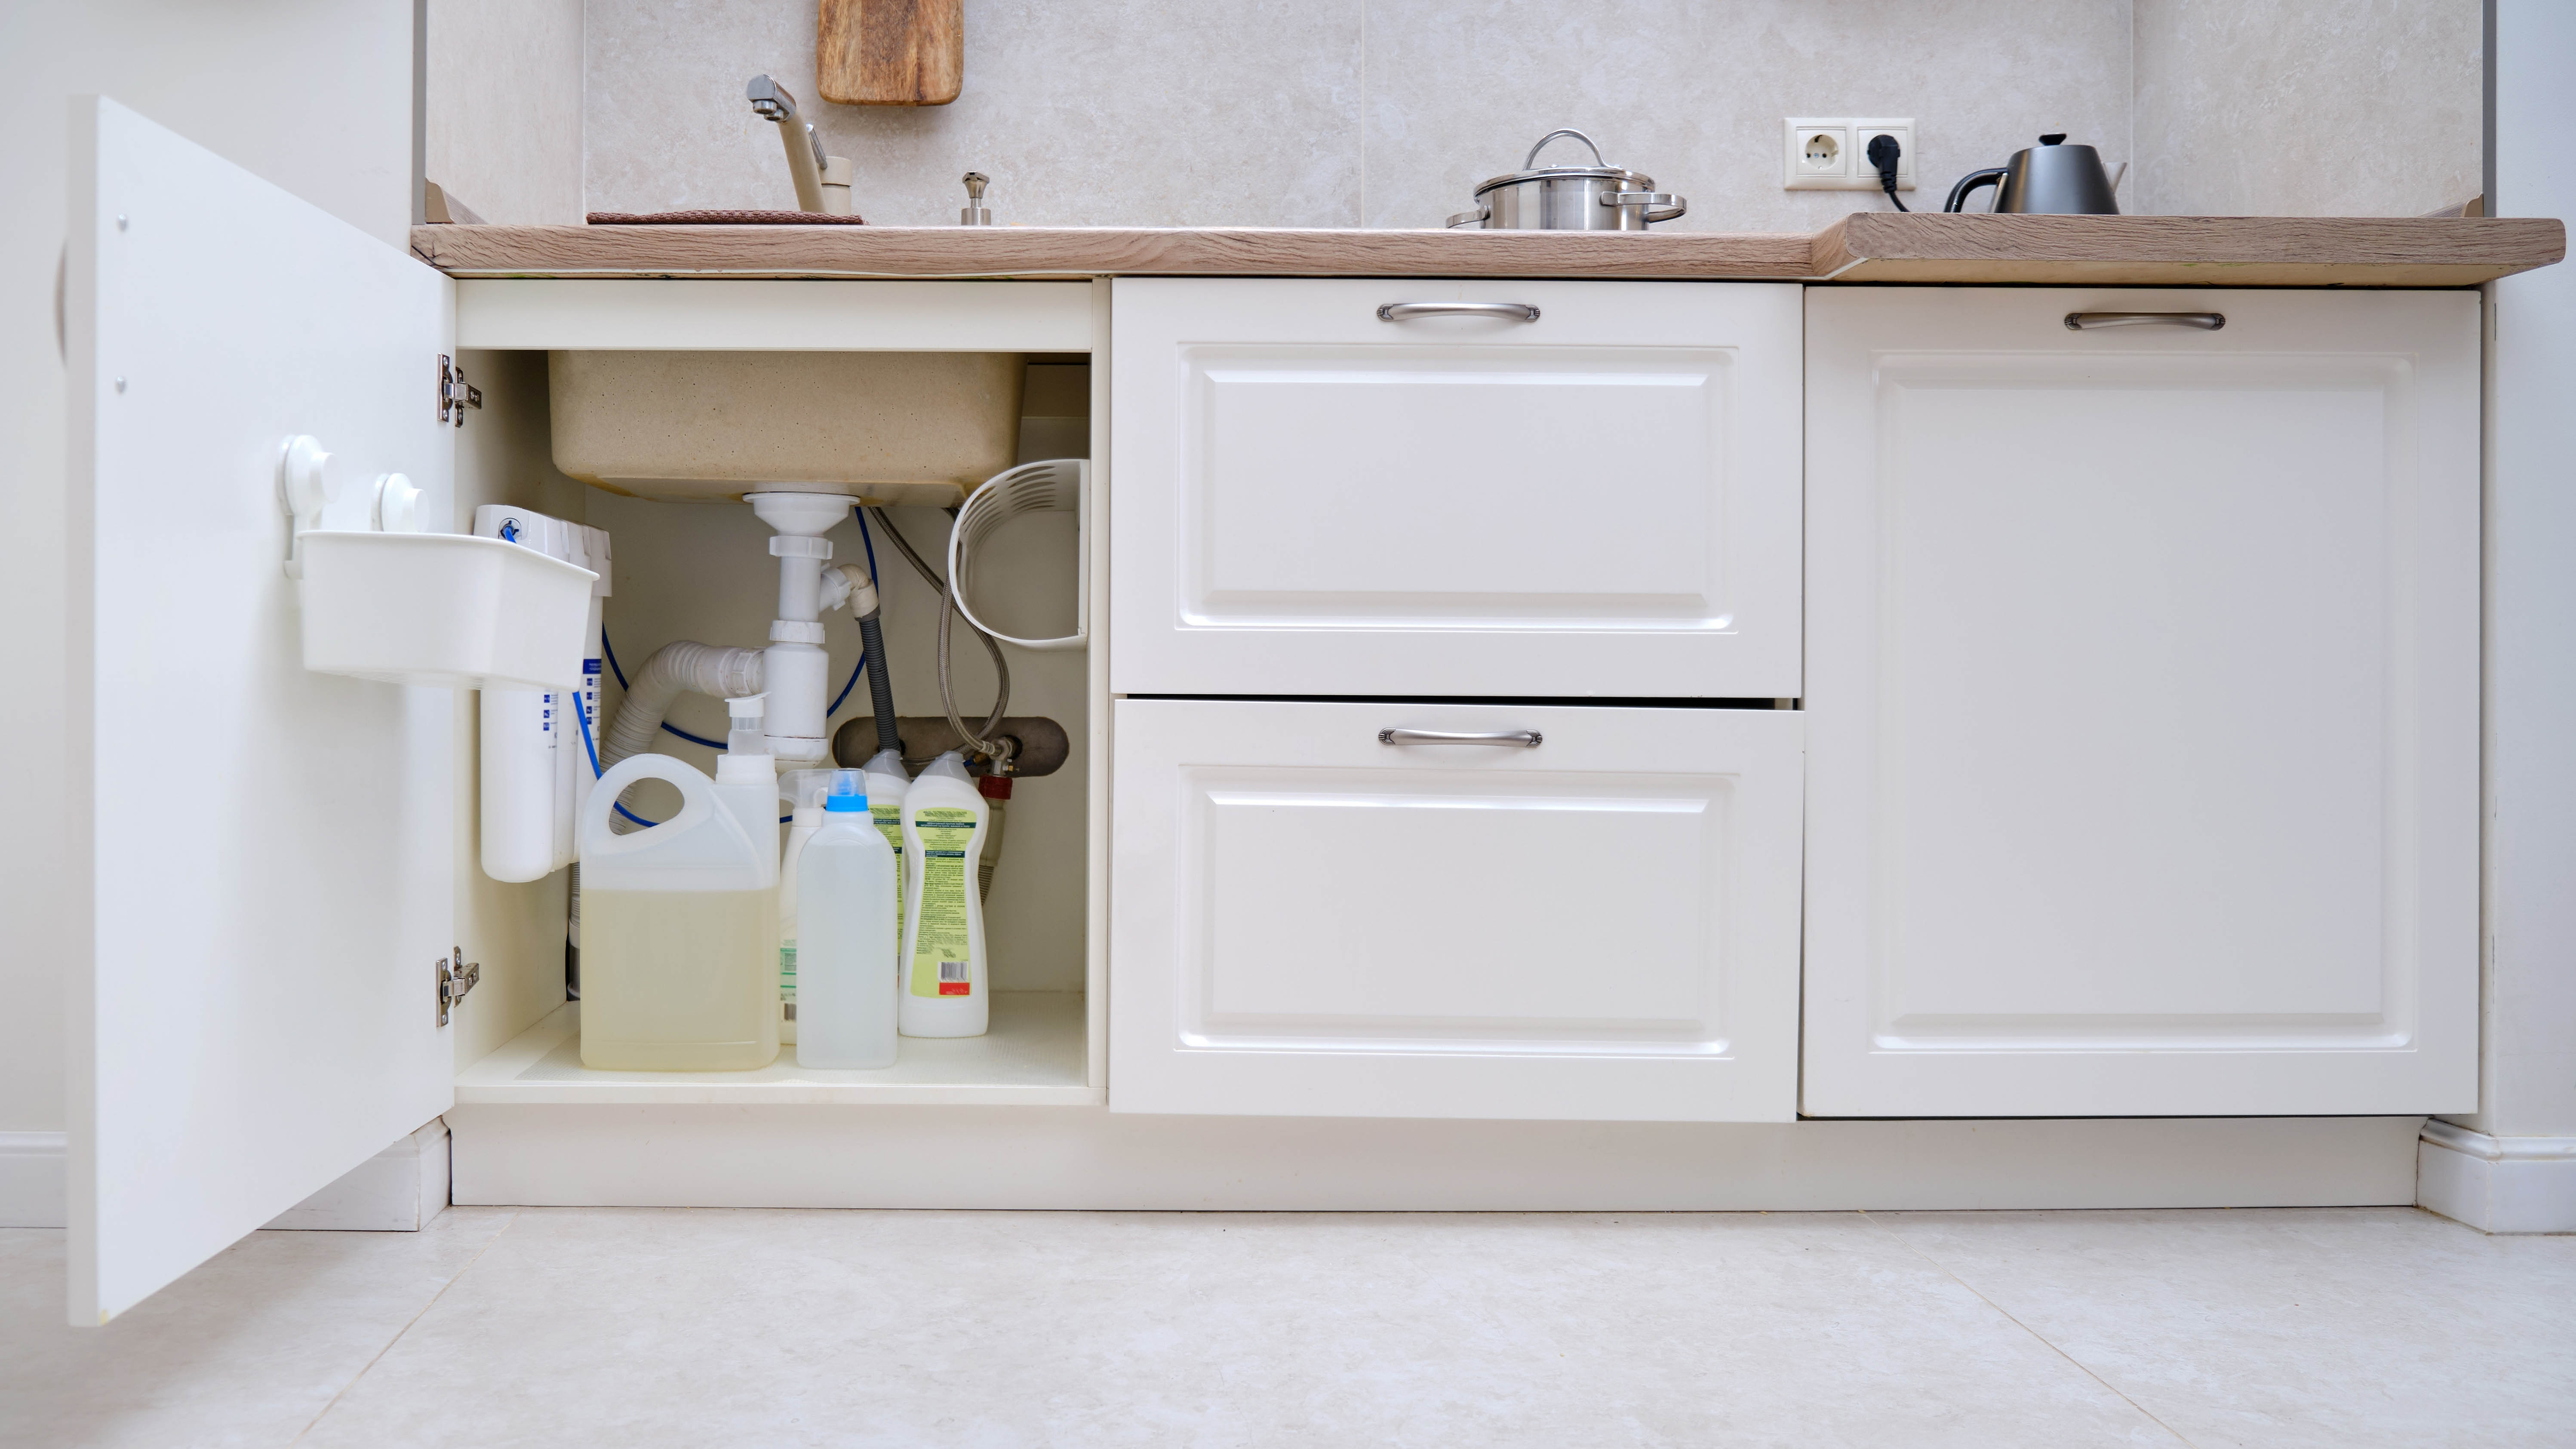 9 things you should never store under the kitchen sink